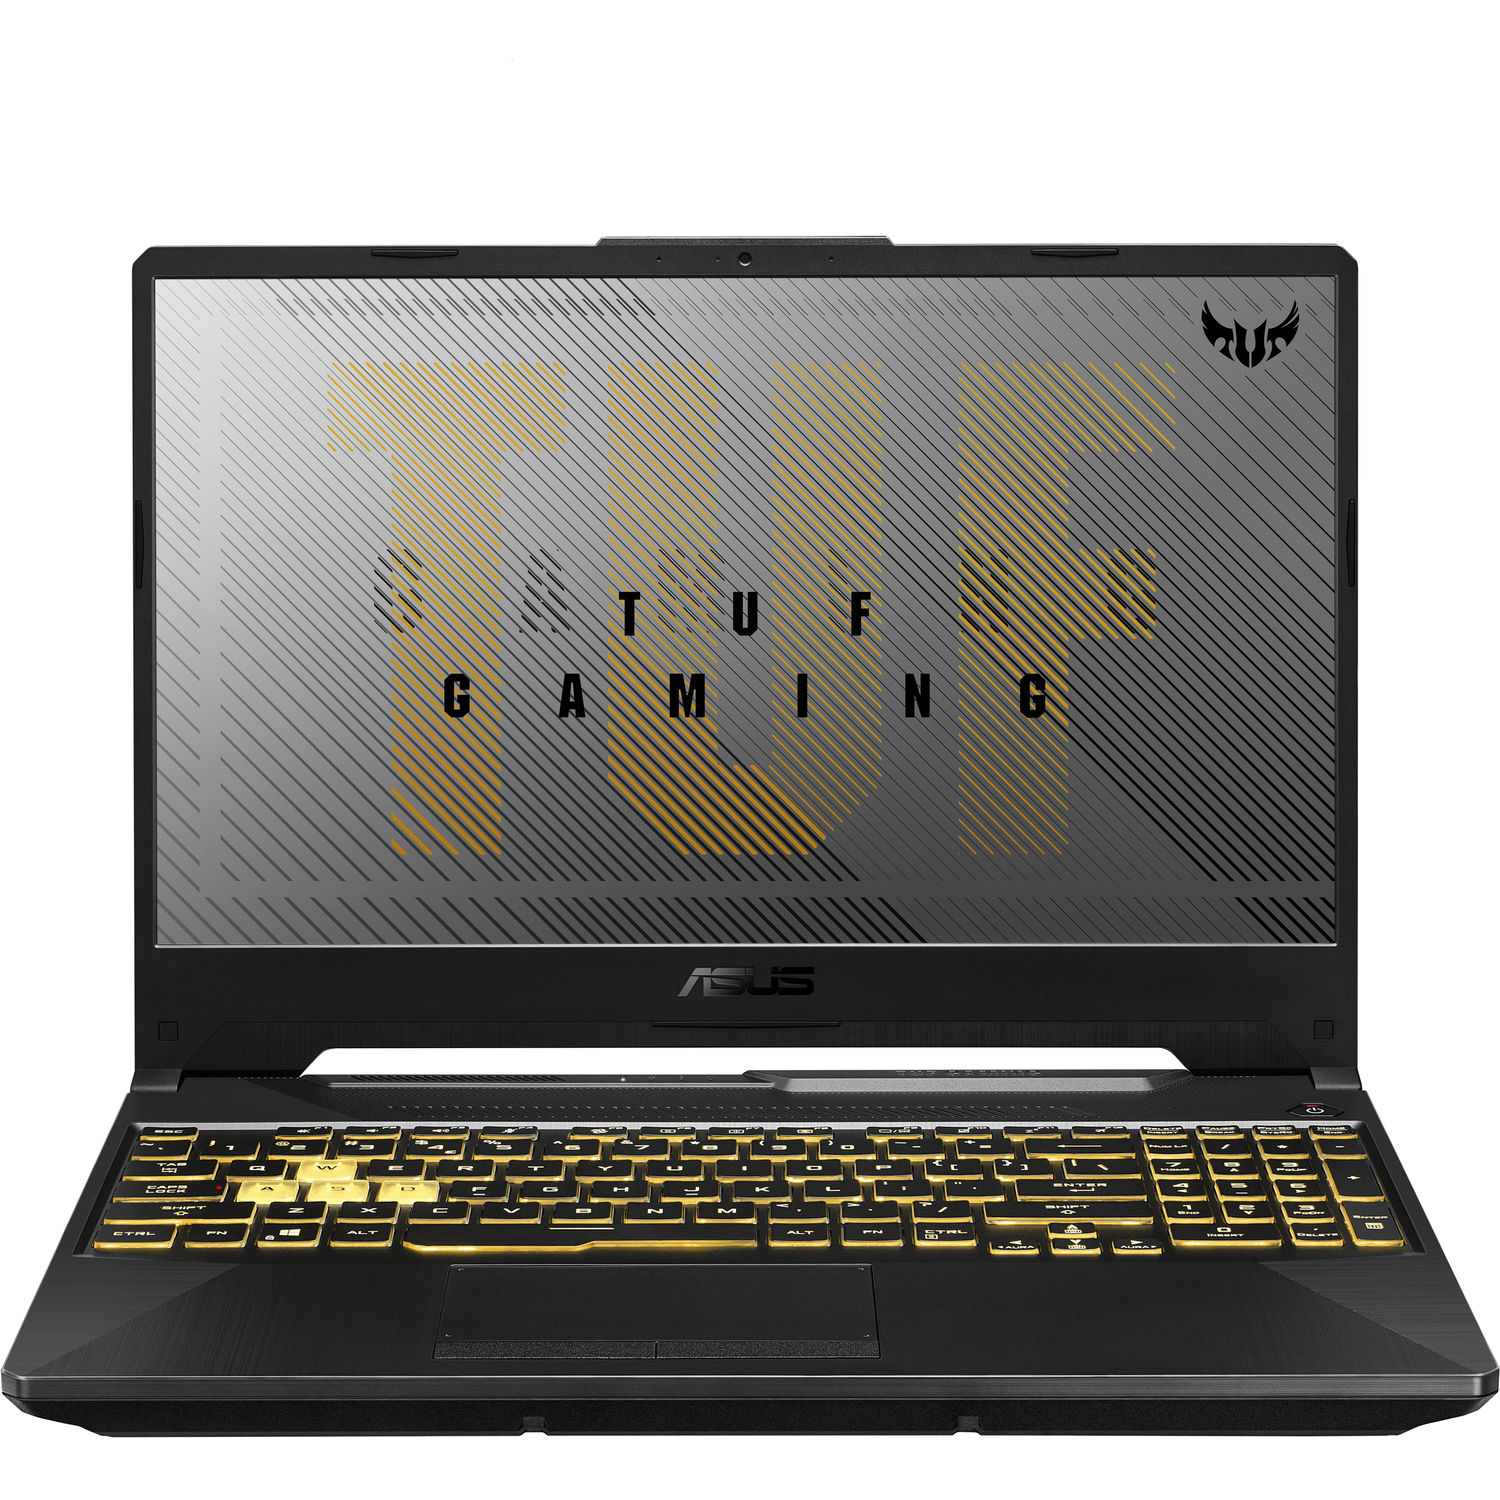 ASUS TUF A15 Gaming and Entertainment Laptop (AMD Ryzen 7 4800H 8-Core, 8GB RAM, 2TB HDD, 15.6" Full HD (1920x1080), NVIDIA GTX 1650 Ti, Wifi, Bluetooth, Webcam, 1xHDMI, Backlit Keyboard, Win 10 Pro) - image 1 of 6